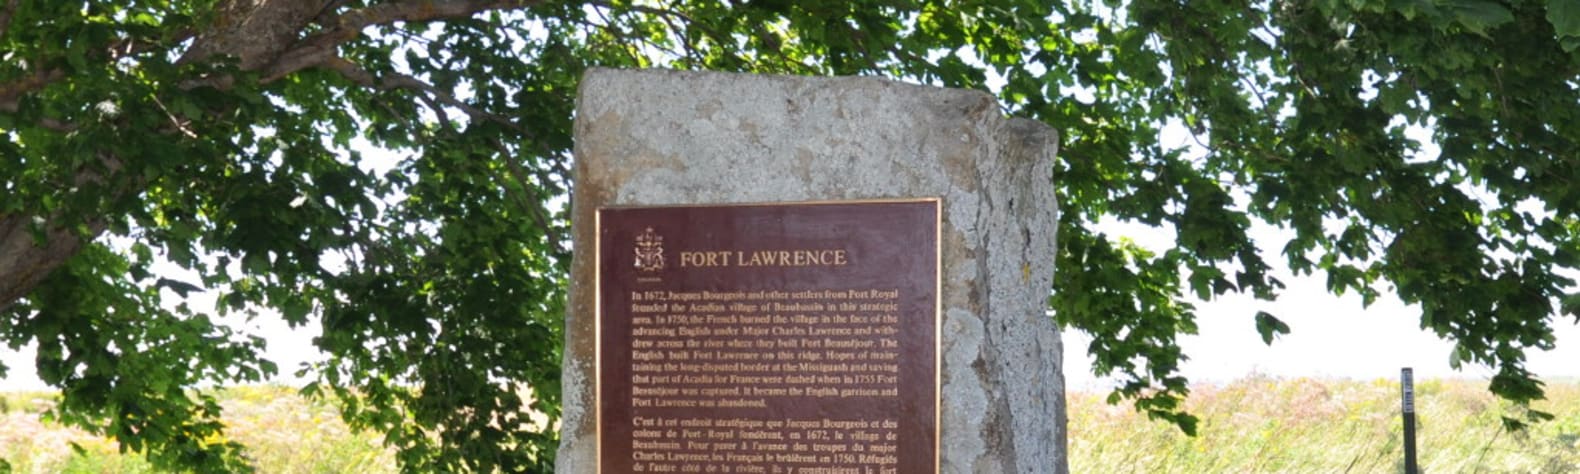 Beaubassin and Fort Lawrence National Historic Sites